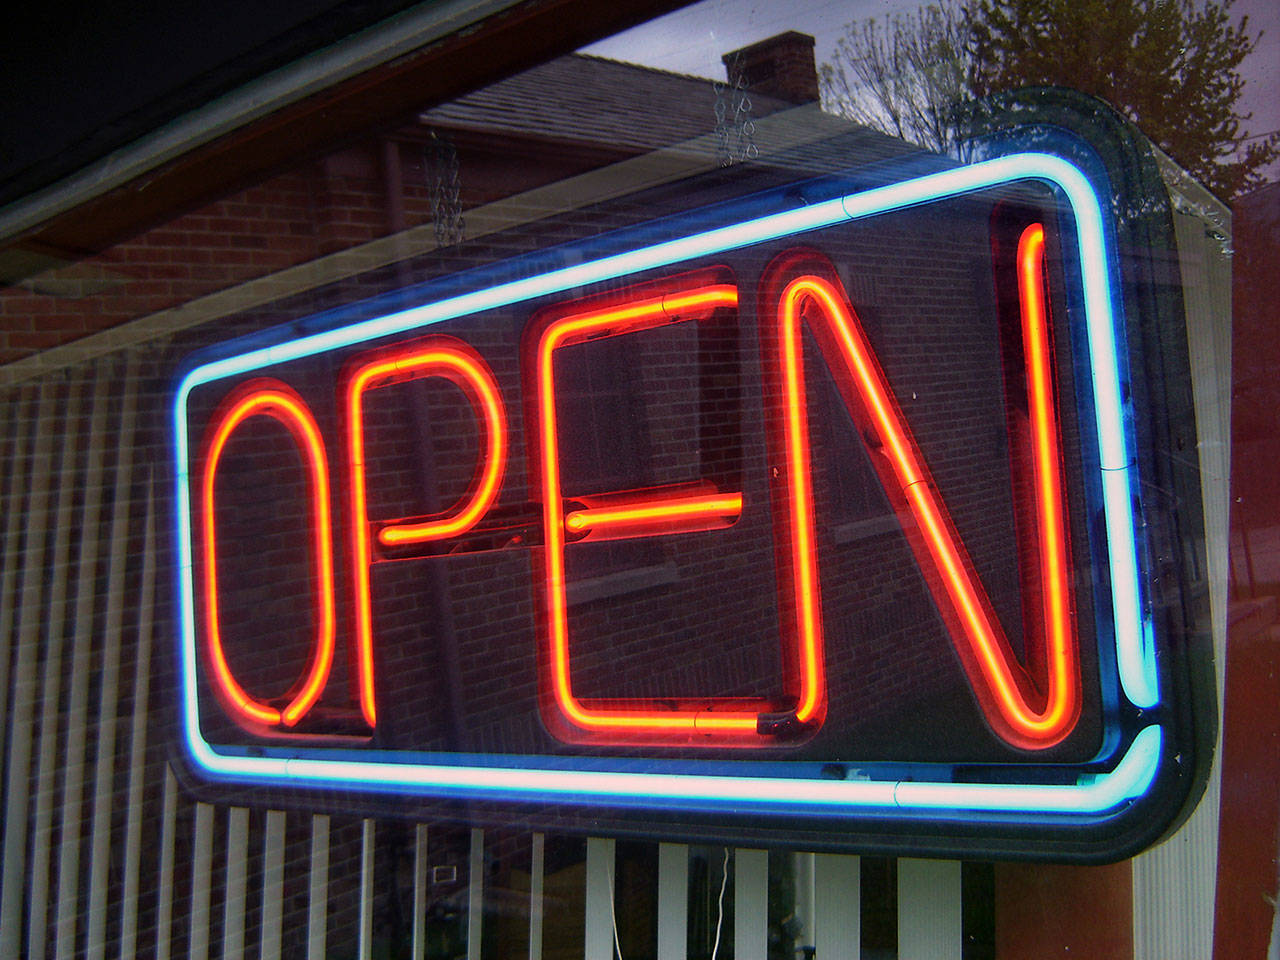 Businesses that open before the governor’s orders allow them to could be fined nearly $10,000. Image courtesy Wikimedia Commons